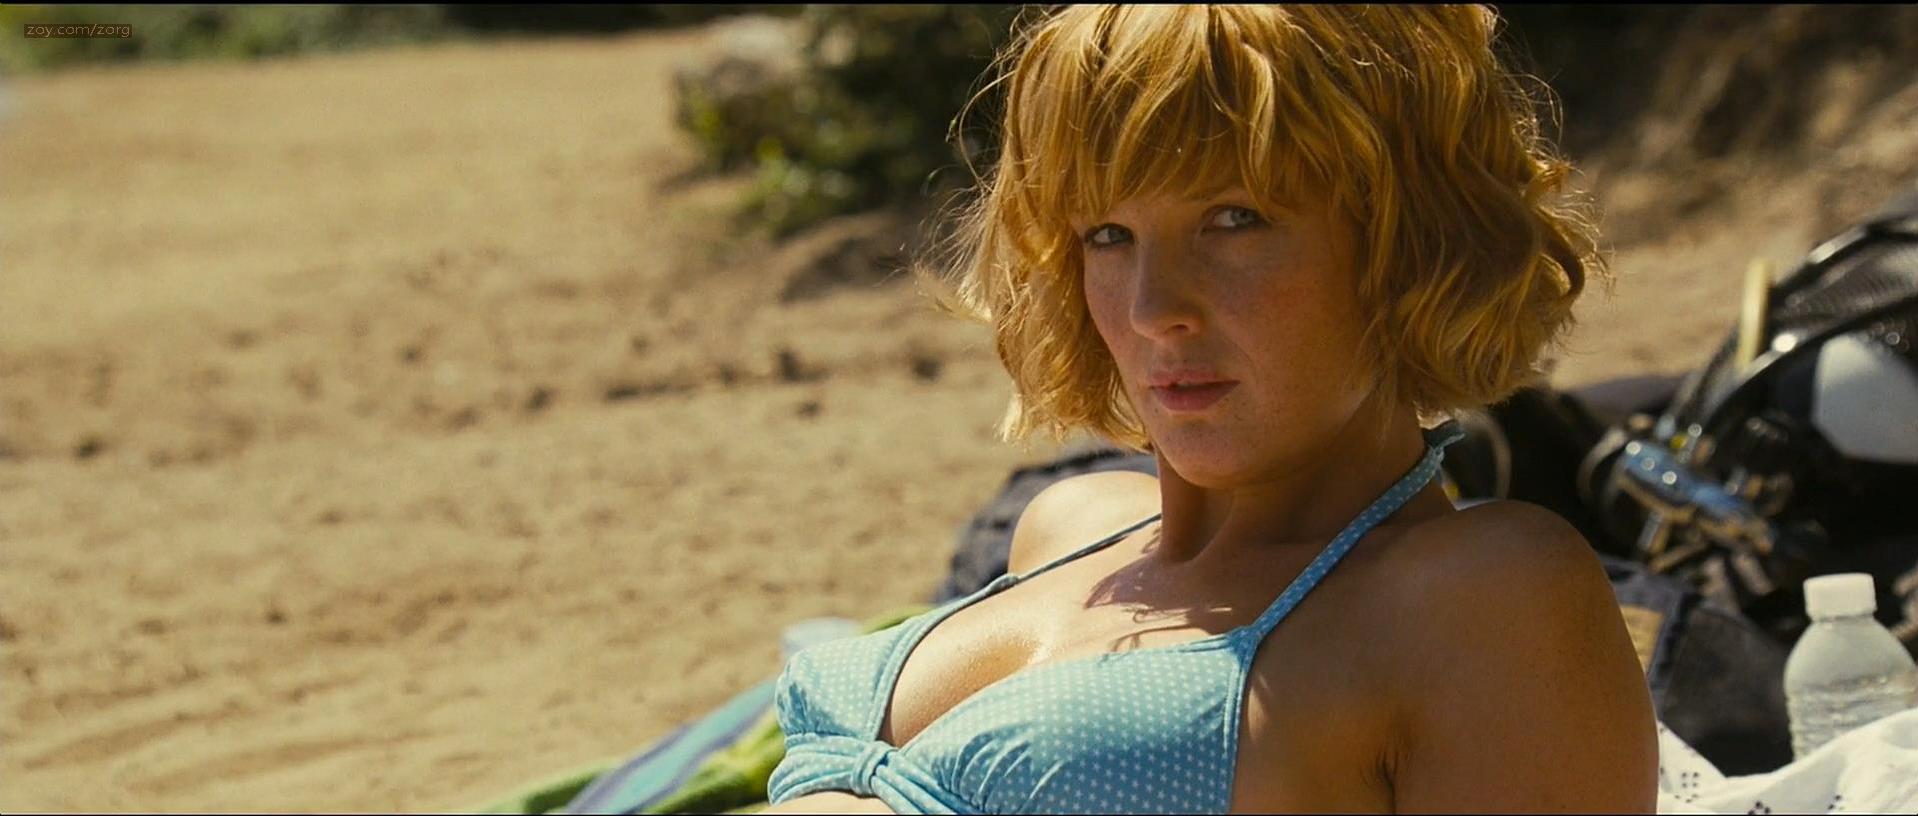 Reilly tits kelly Kelly Reilly